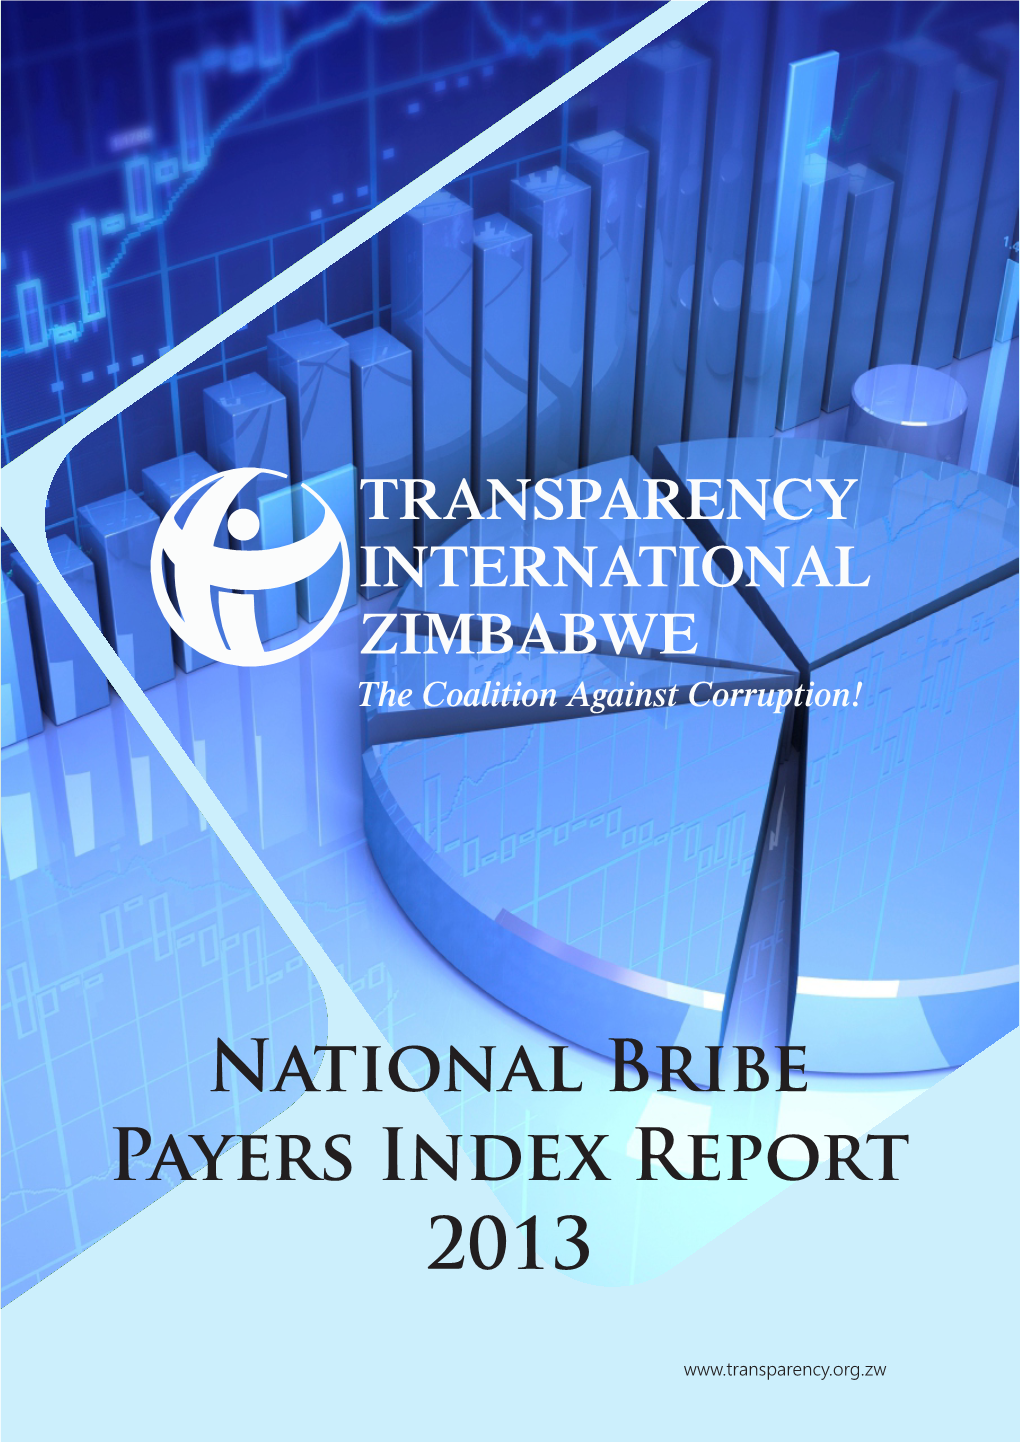 National Bribe Payers Index Report 2013